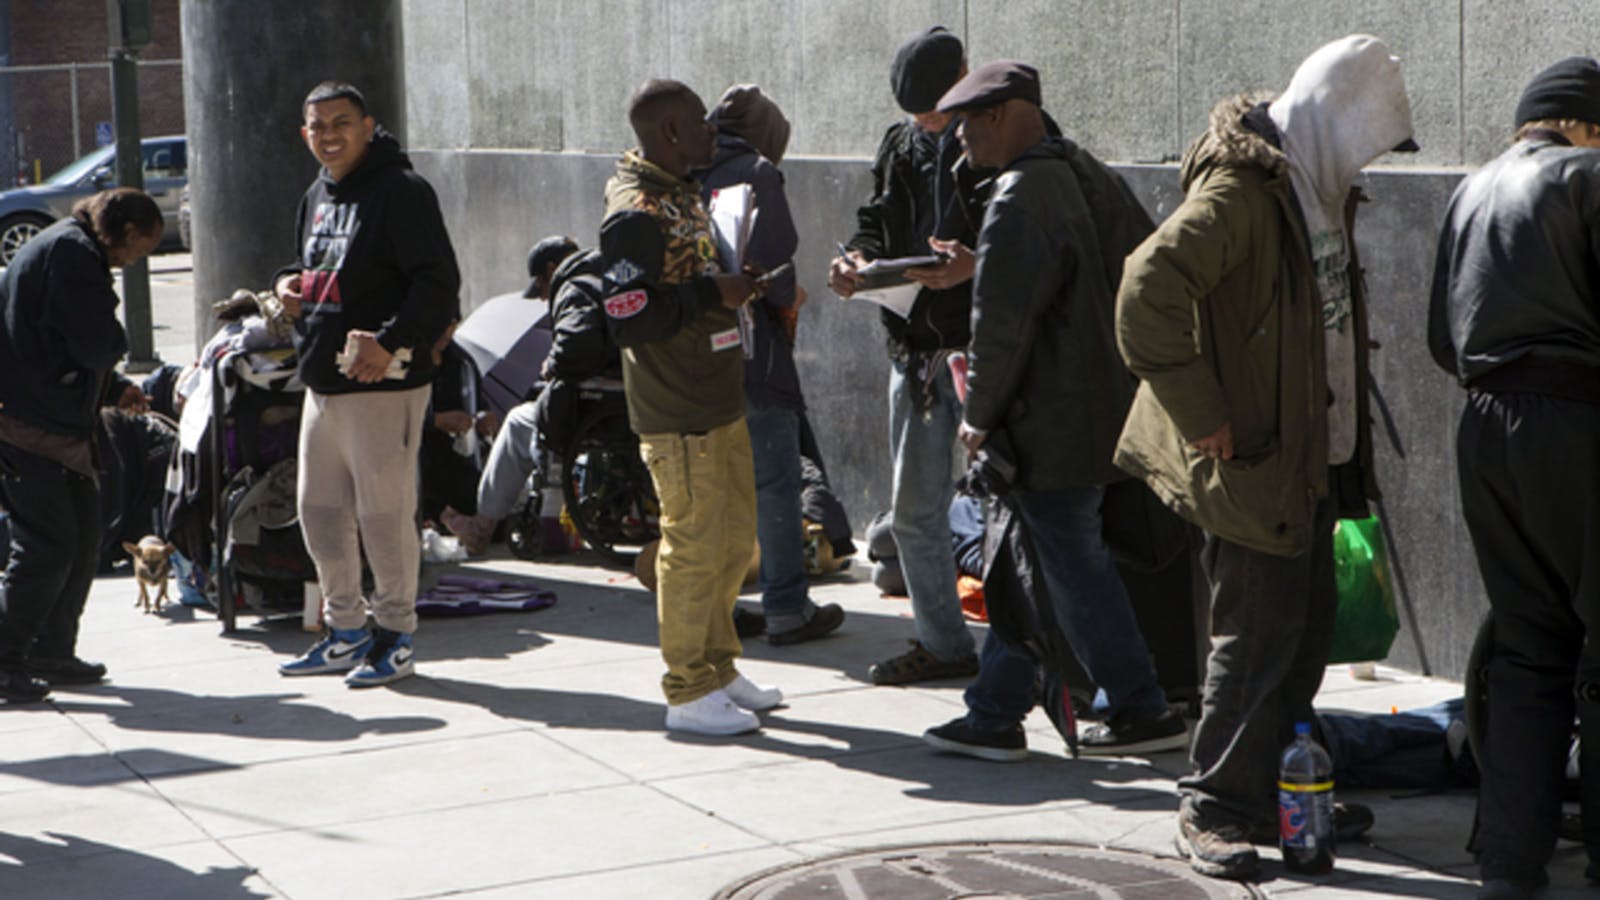 Homeless people on the sidewalk in San Francisco's Mission District earlier this year. Photo: AP